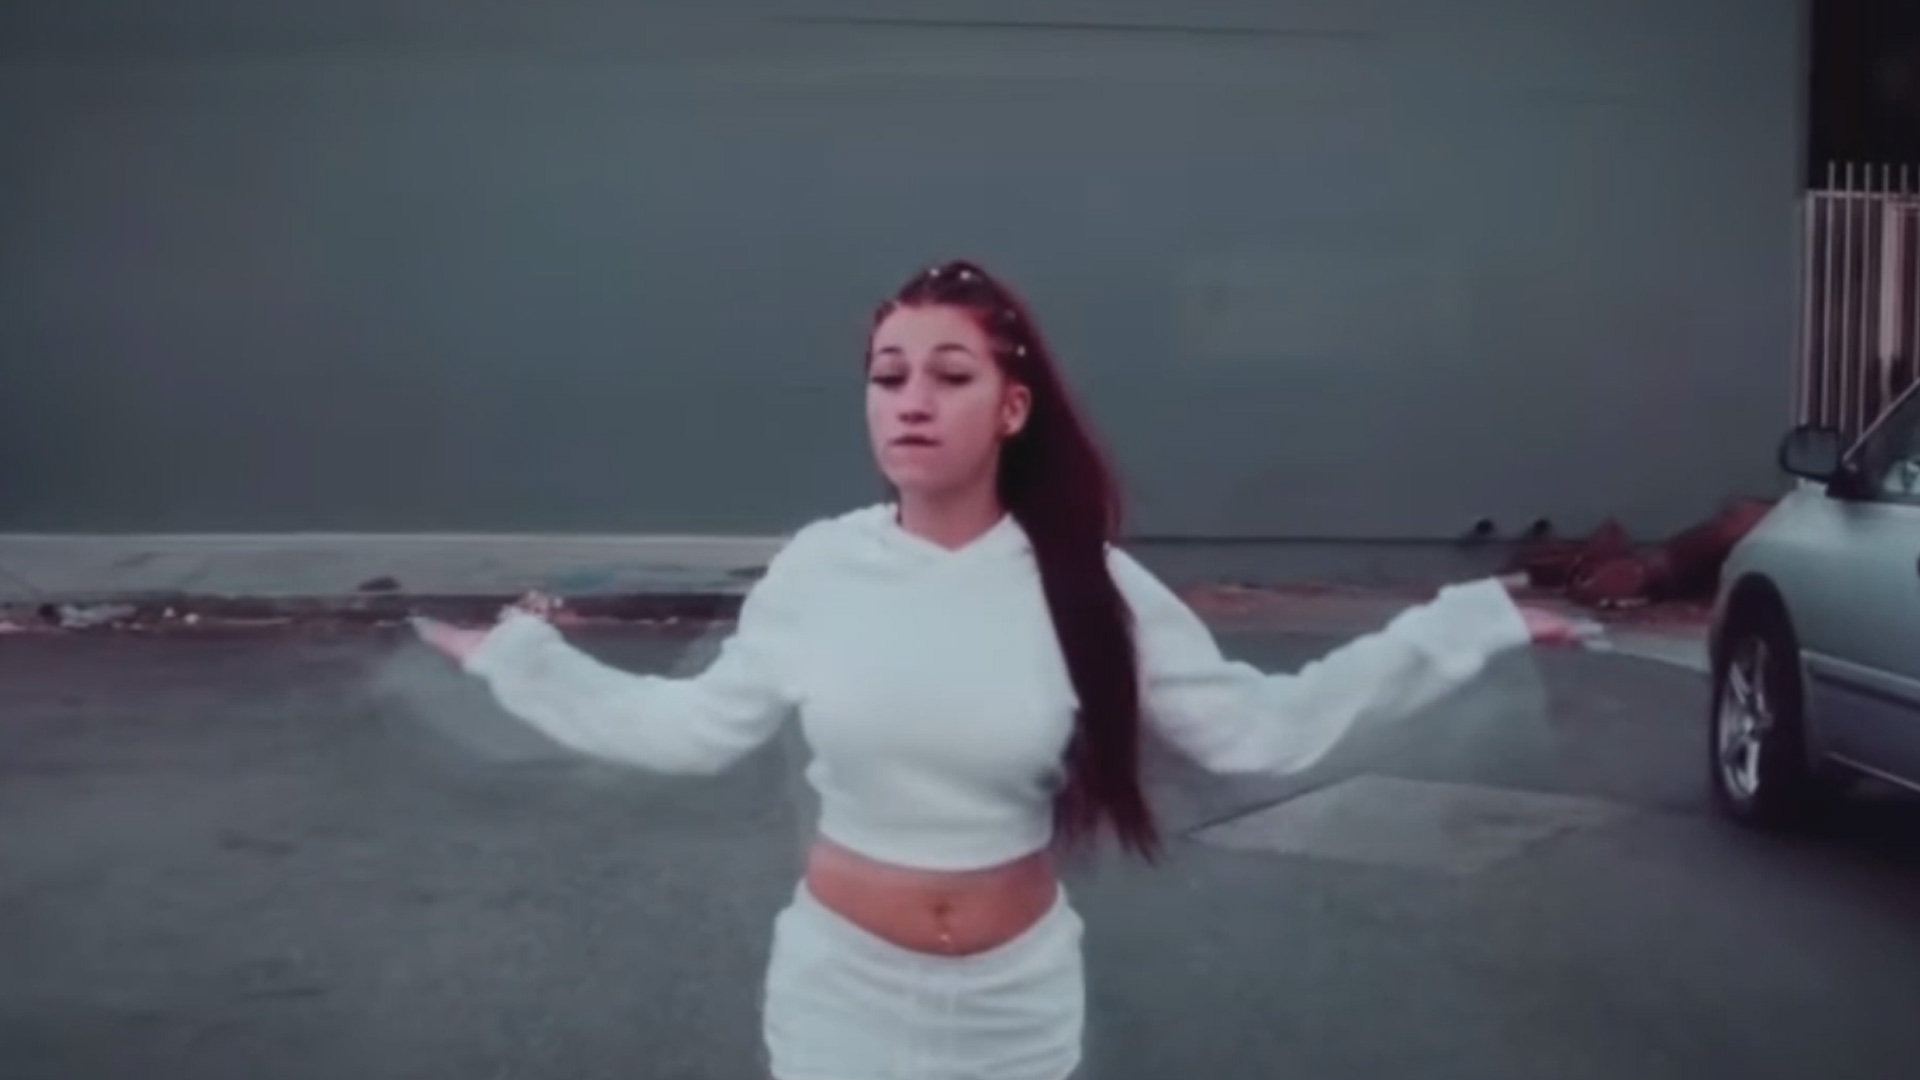 Bhad Bhabie Wallpapers